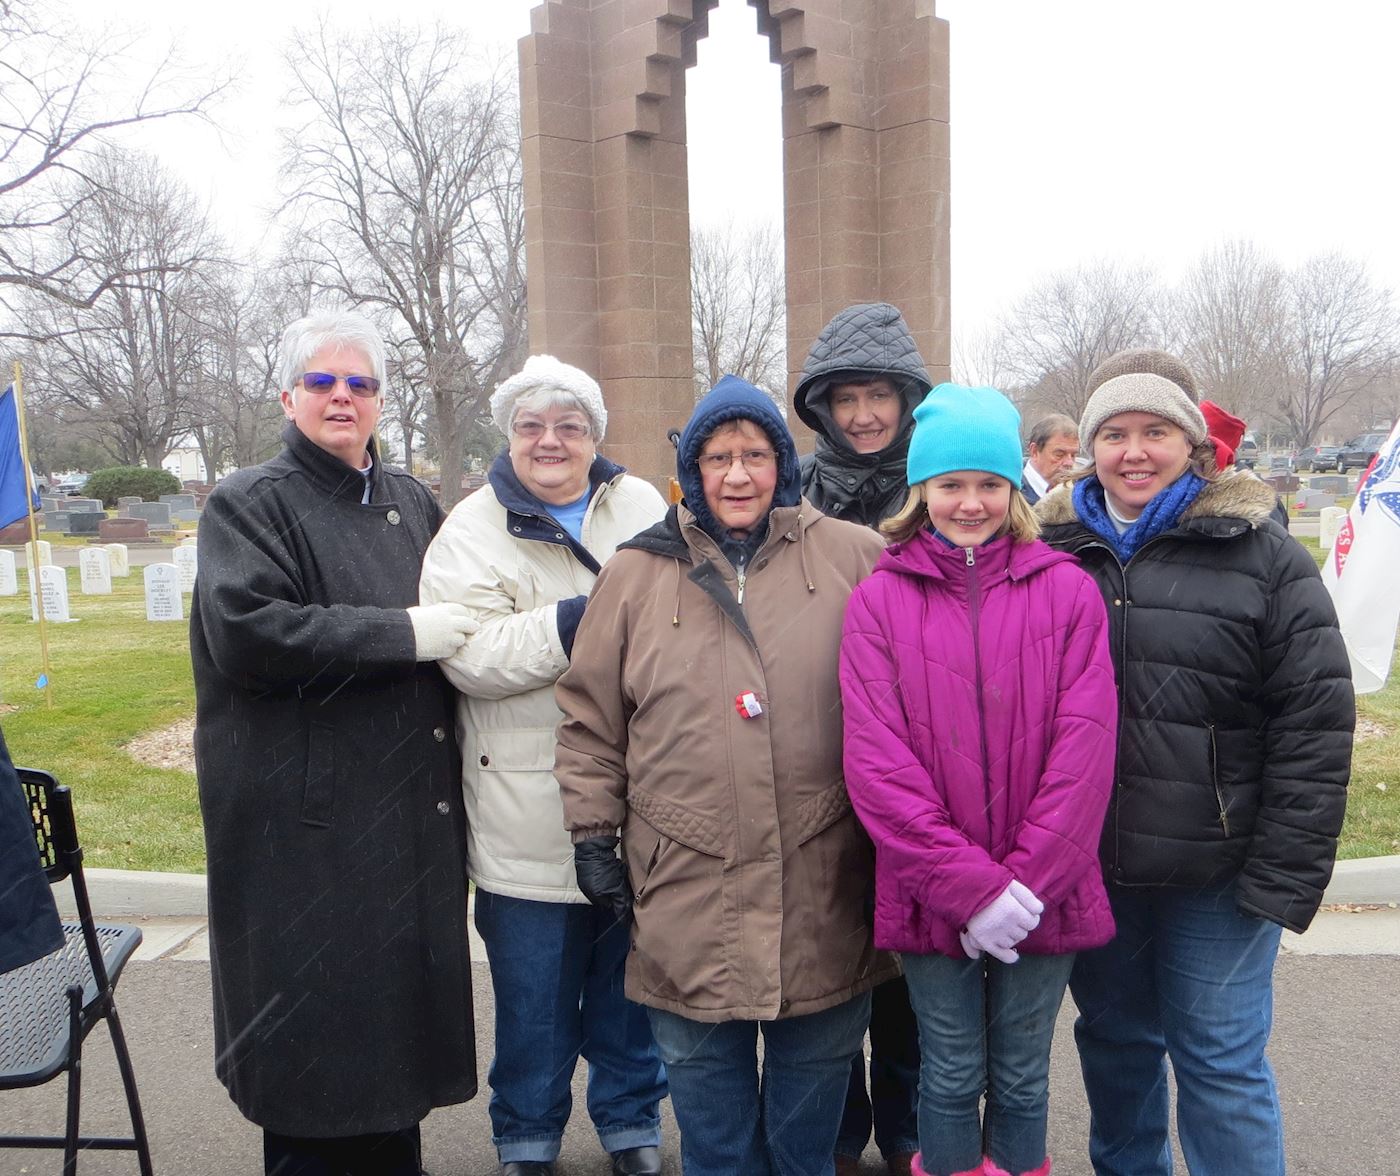 Glorietta Pass Chapter, Daughters of the Union volunteers placed wreaths at the old Veteran's Section